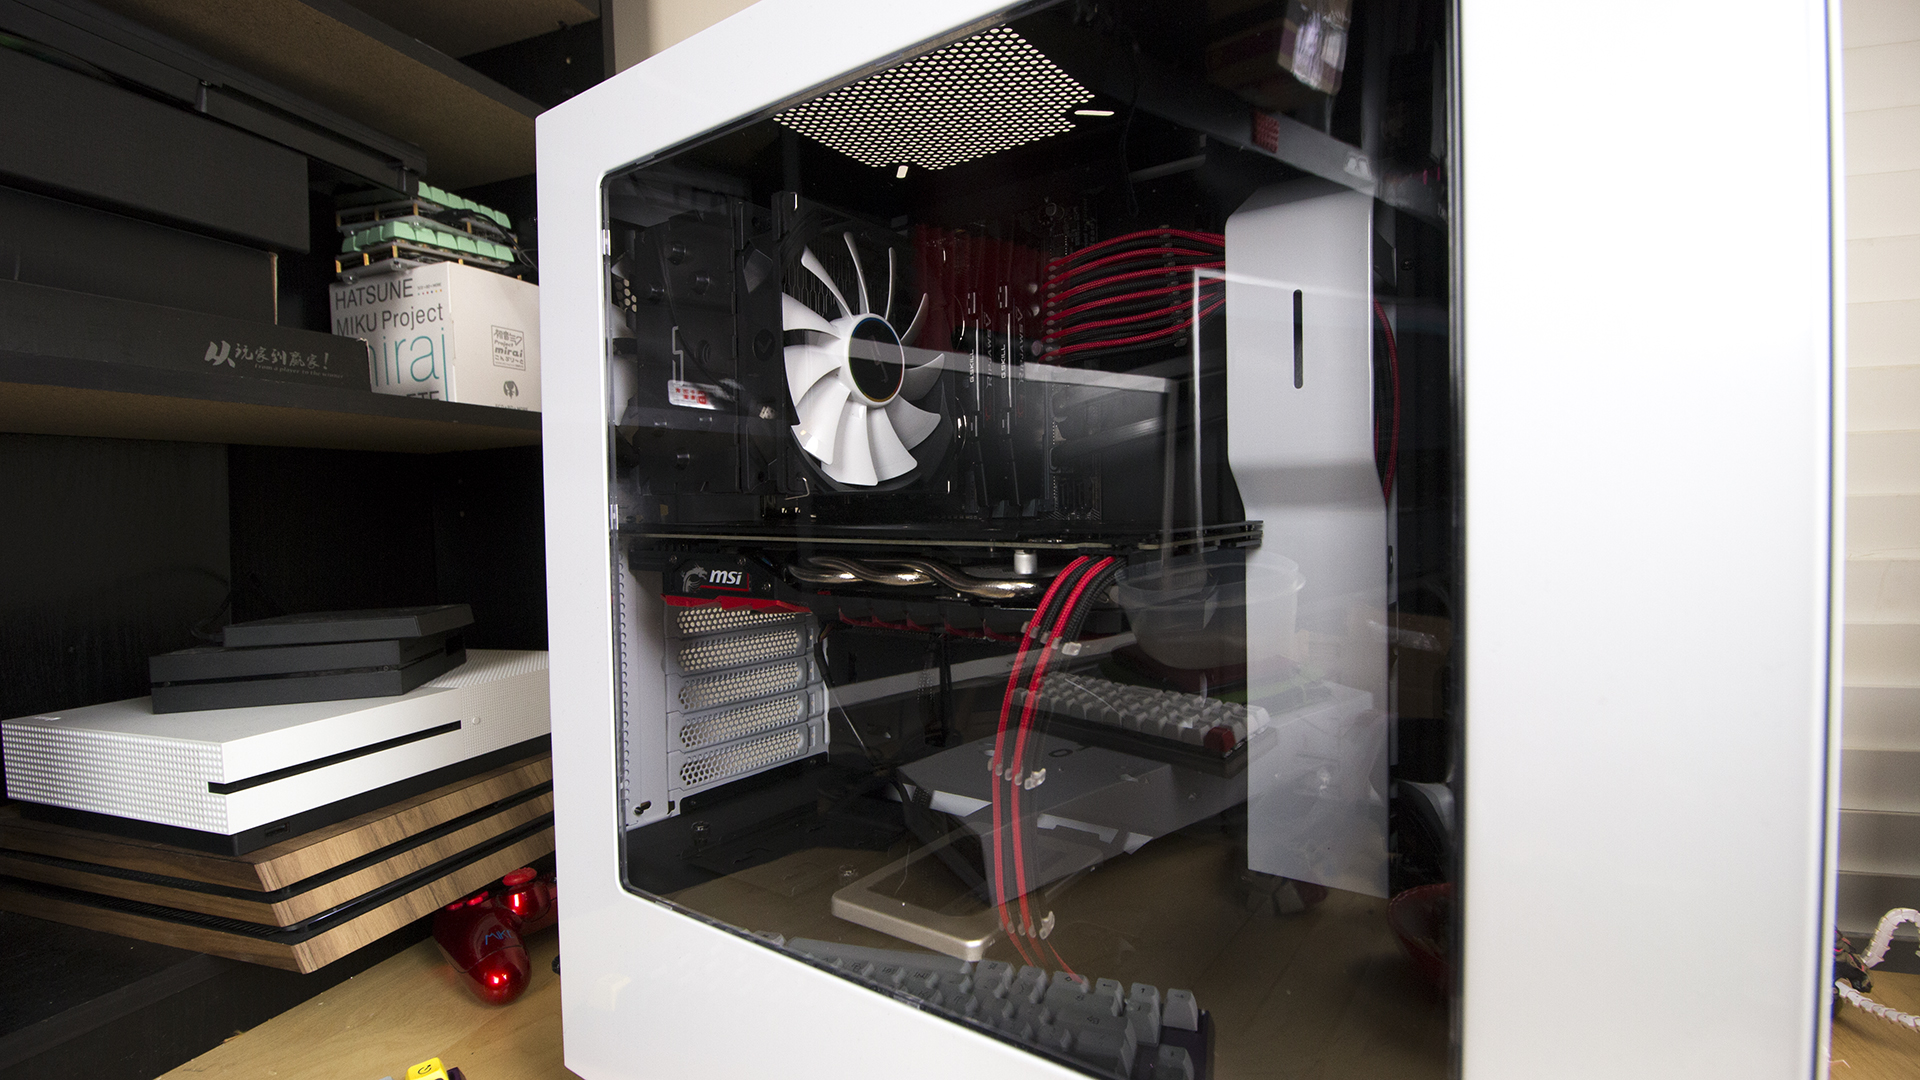 New Service Builds Gaming PCs Based On The Games You Want To Play